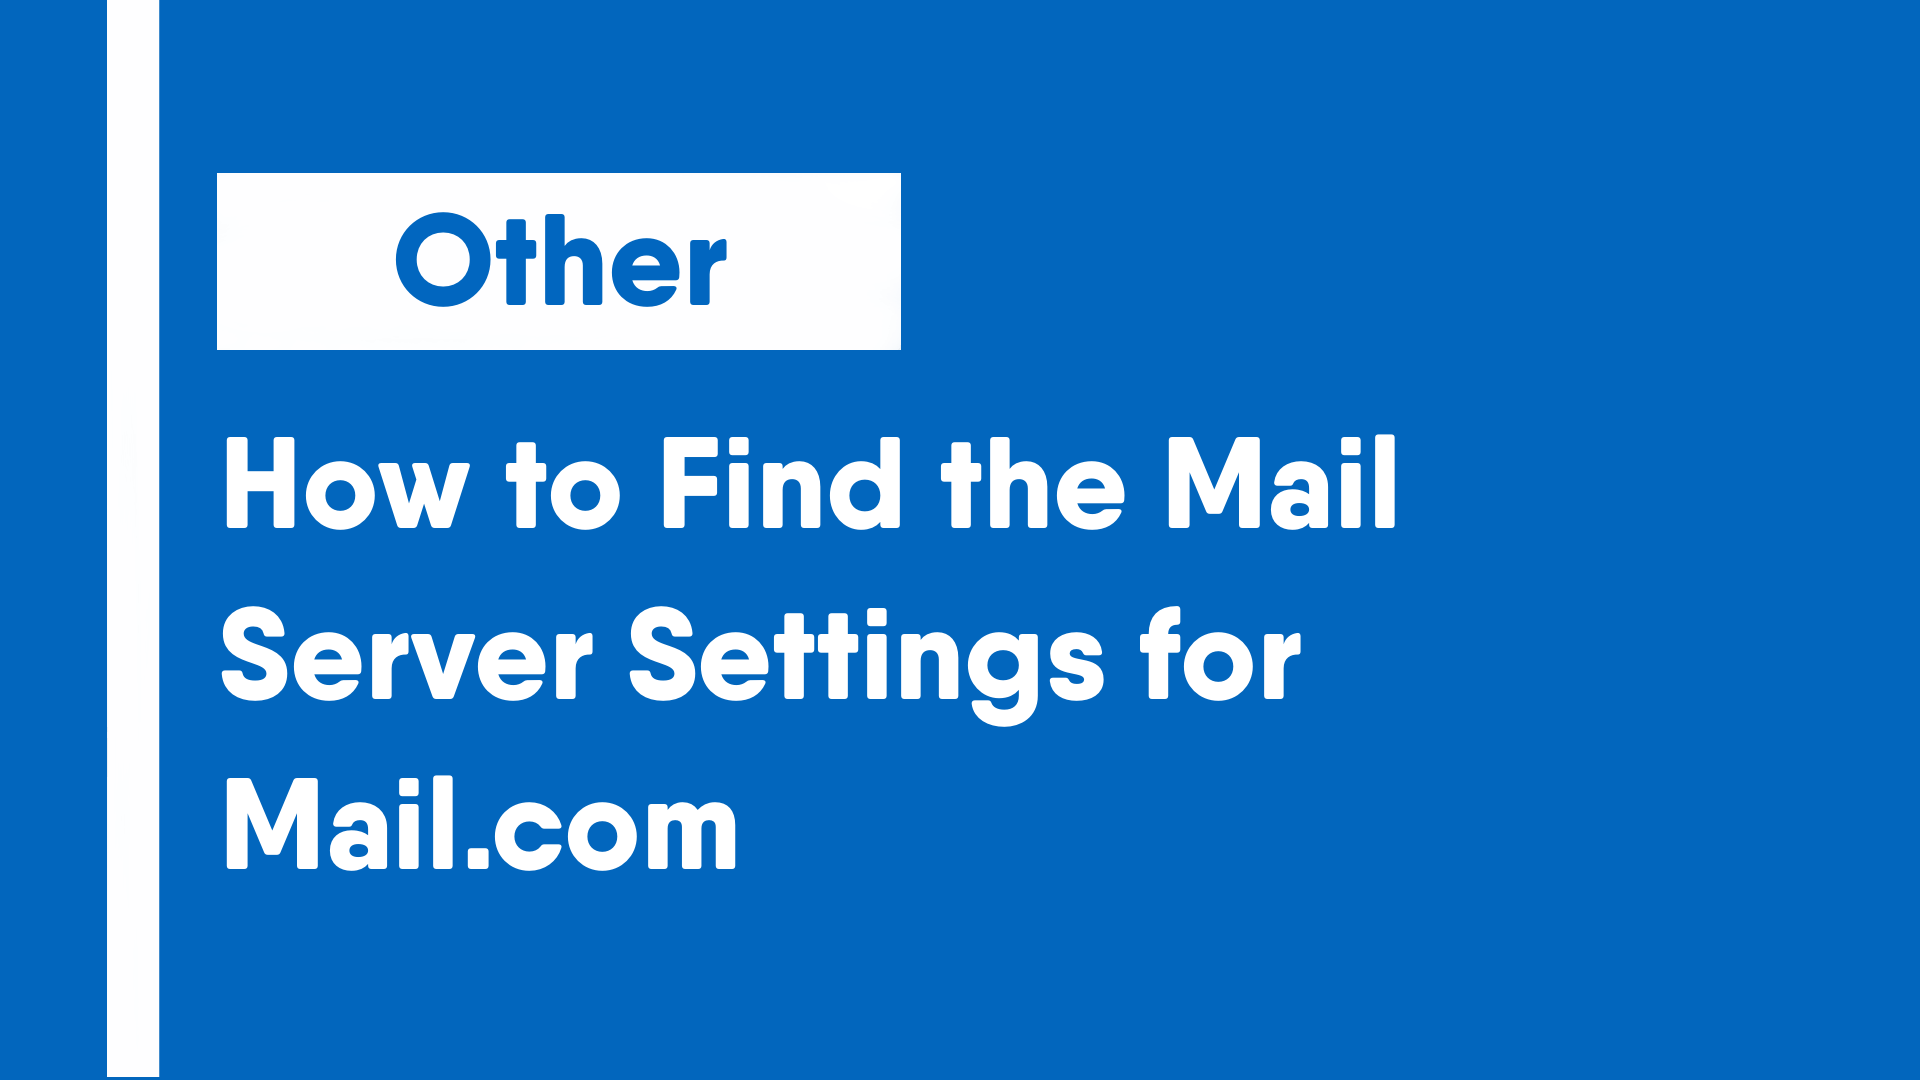 How to Find the Mail Server Settings for Mail com